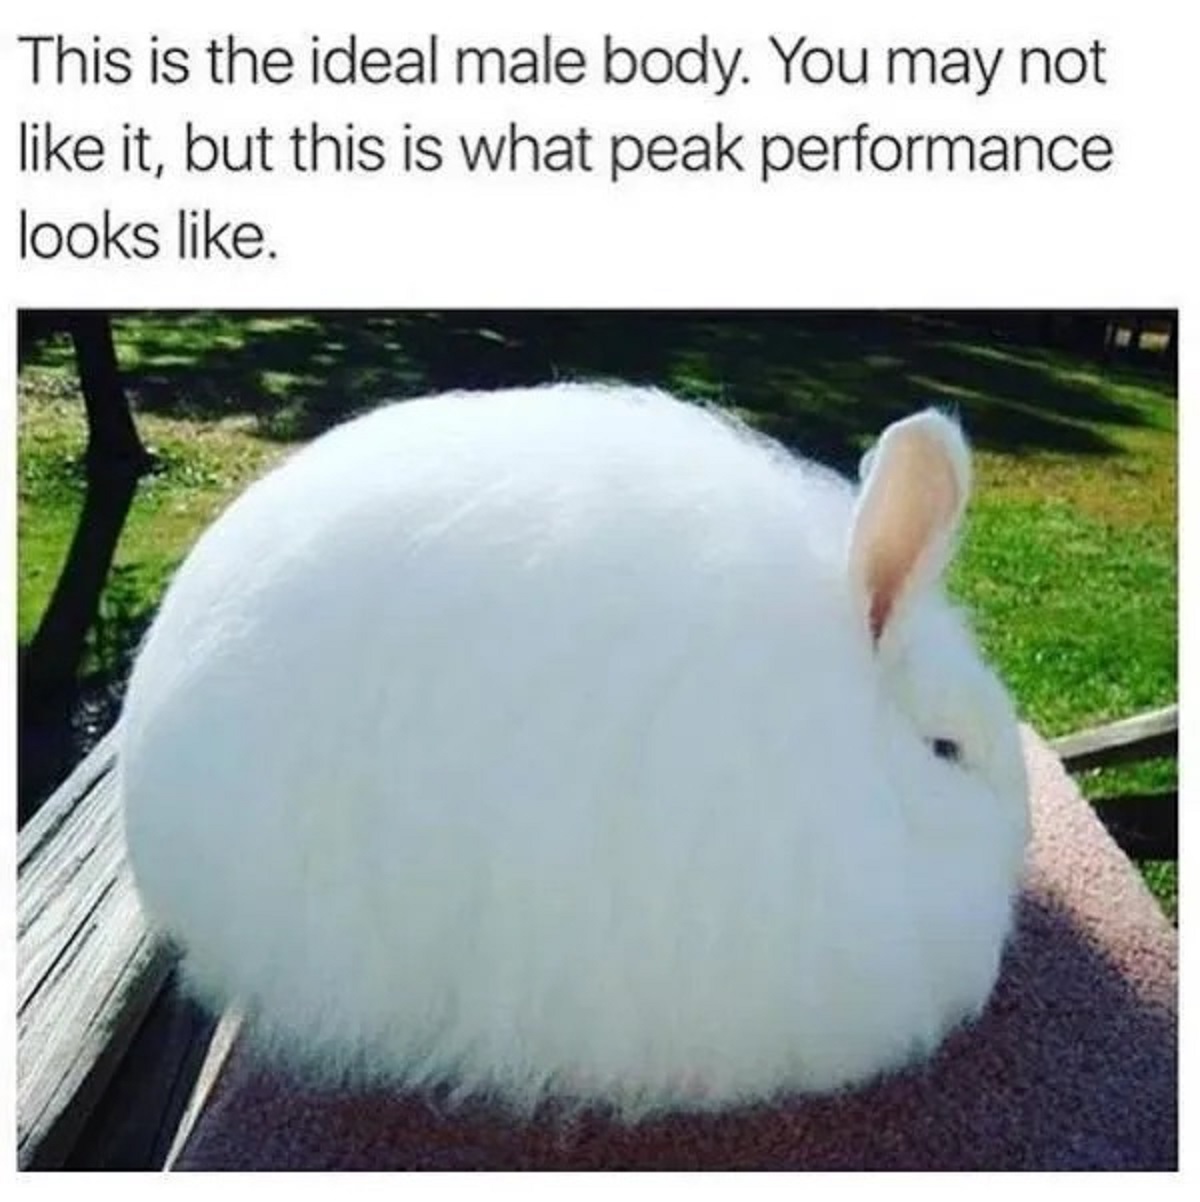 ideal male body bunny - This is the ideal male body. You may not it, but this is what peak performance looks .